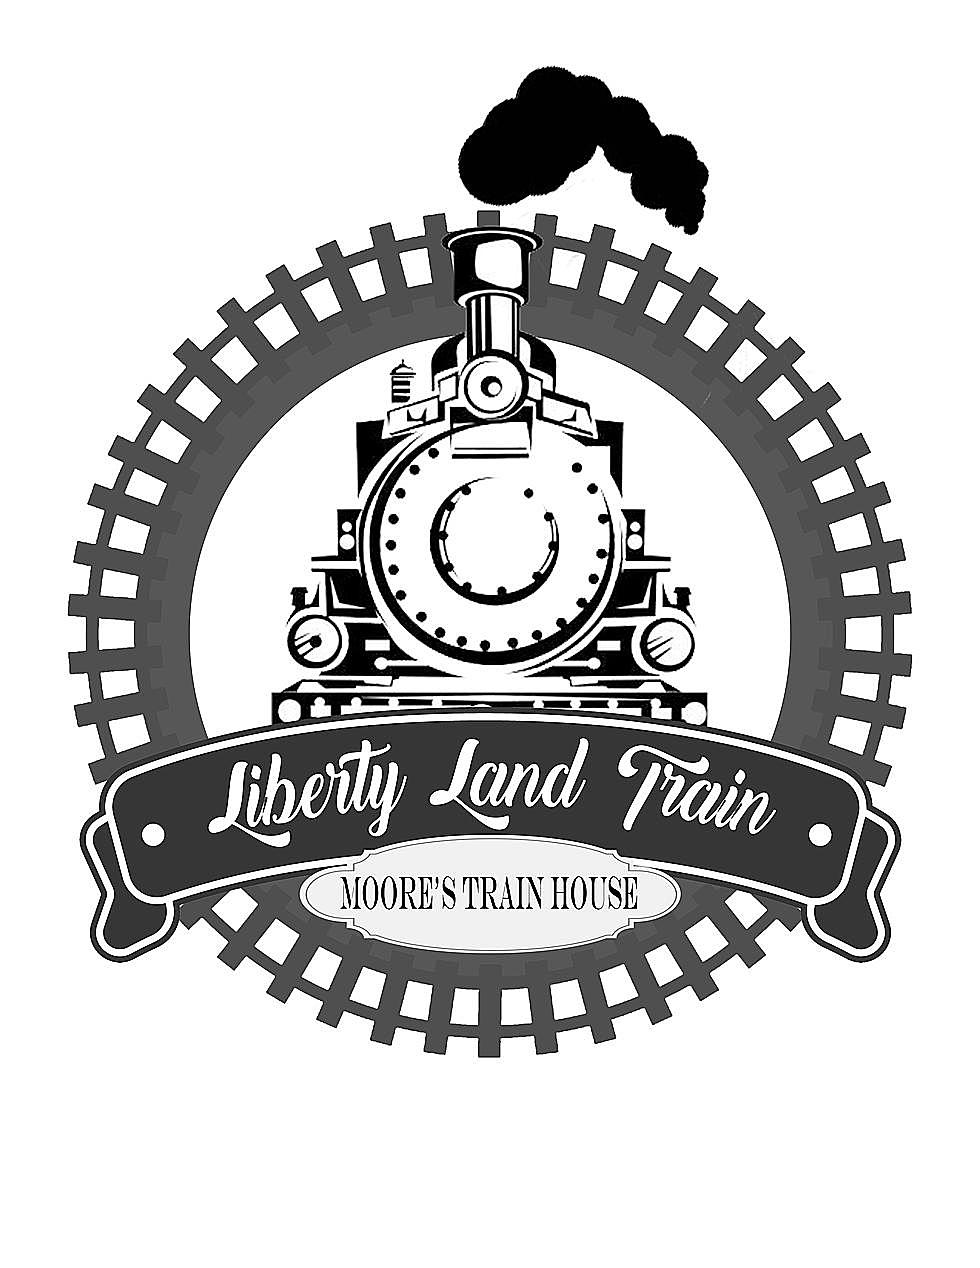 Now's Your Chance to Drive the Liberty Land Train in Sedalia